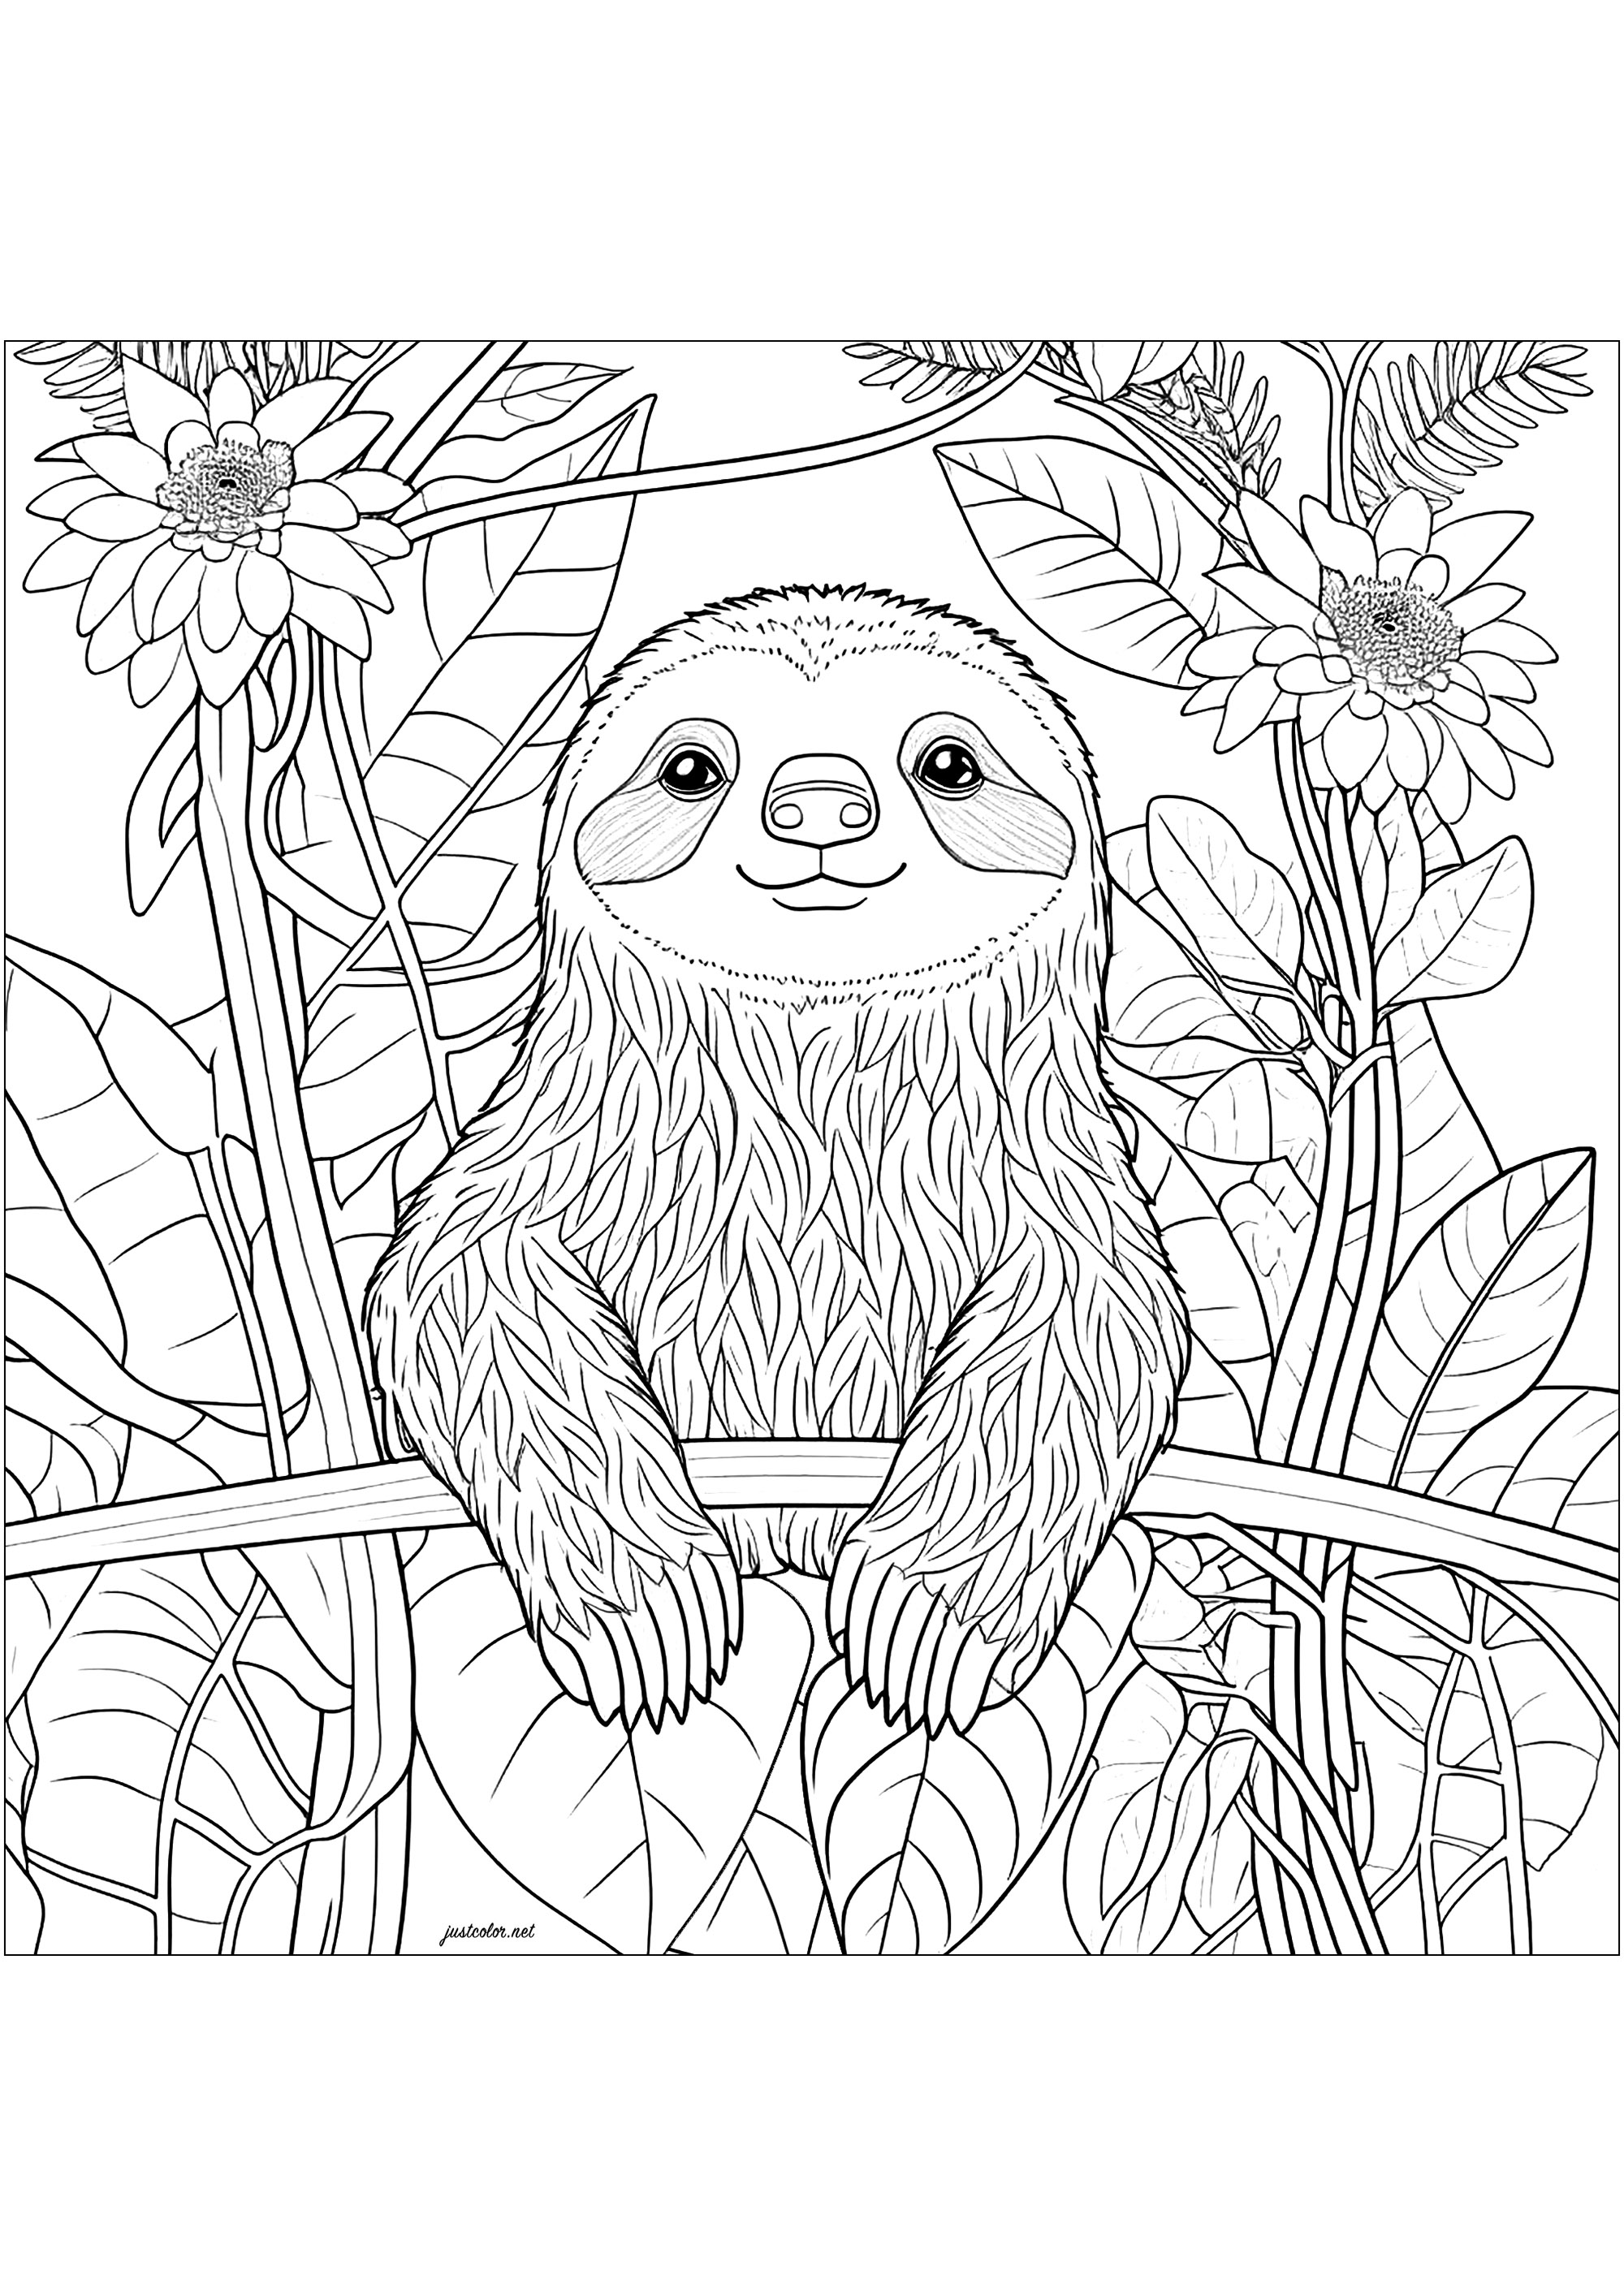 Coloring page of a Sloth. Sloths are arboreal mammals from South and Central America with an original way of life: they almost always hang upside down in trees and move slowly.